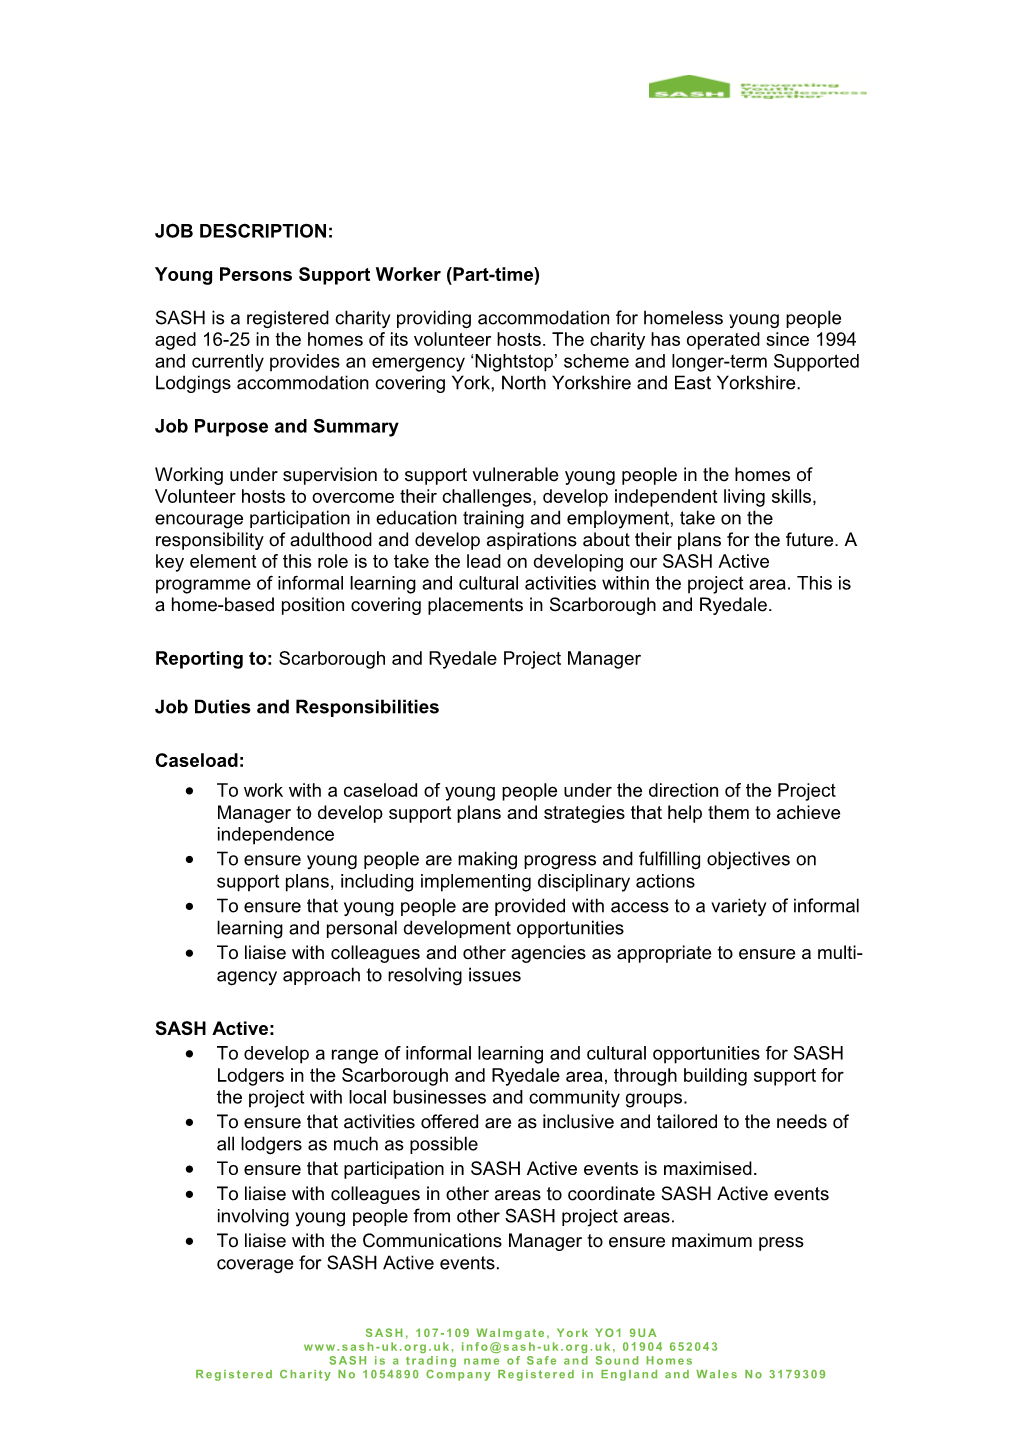 Young Persons Support Worker(Part-Time)